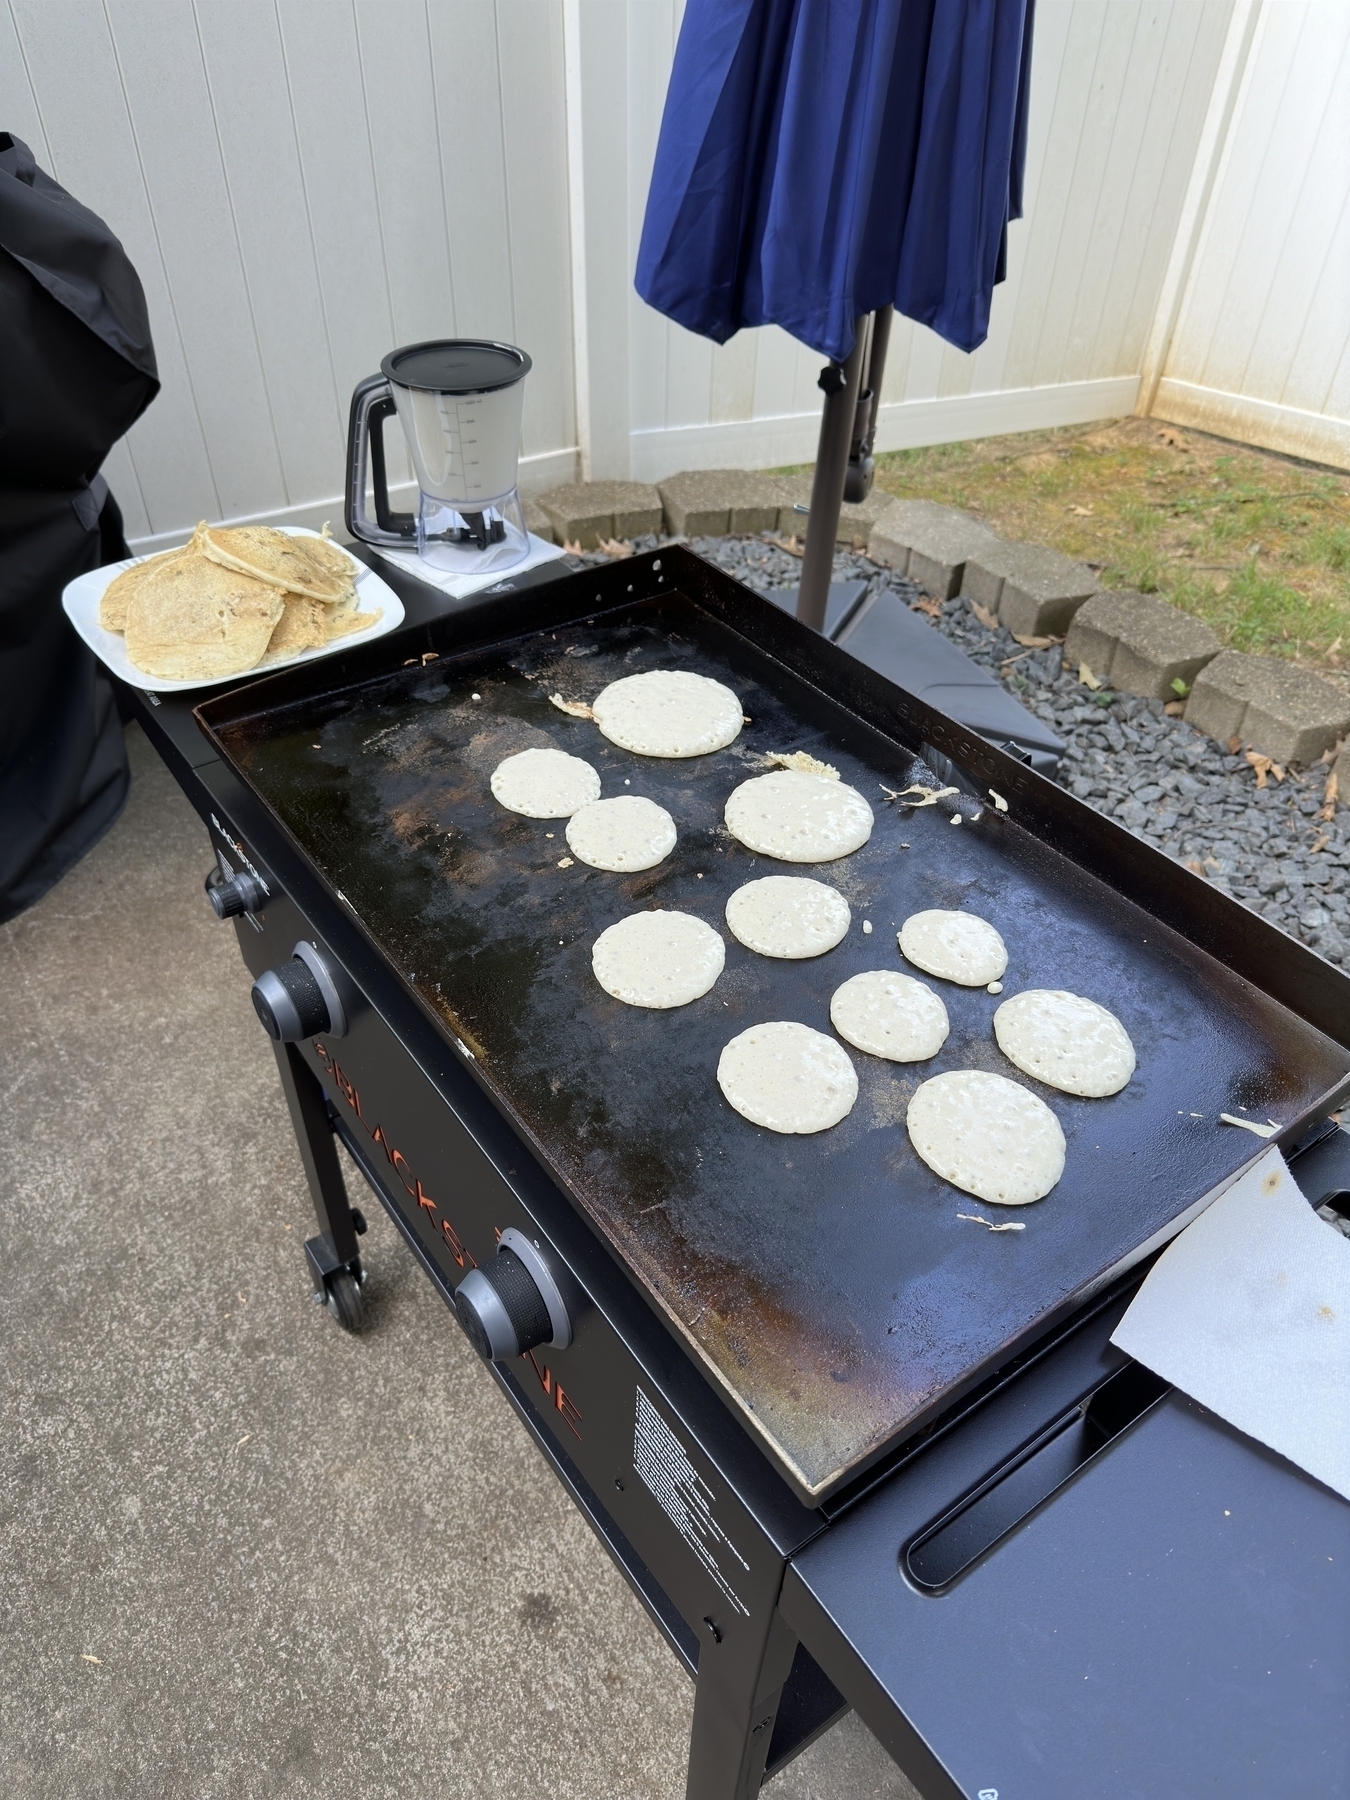 A griddle is being used to cook small, round pancakes next to a plate of prepared pancakes and a kitchen appliance outside.